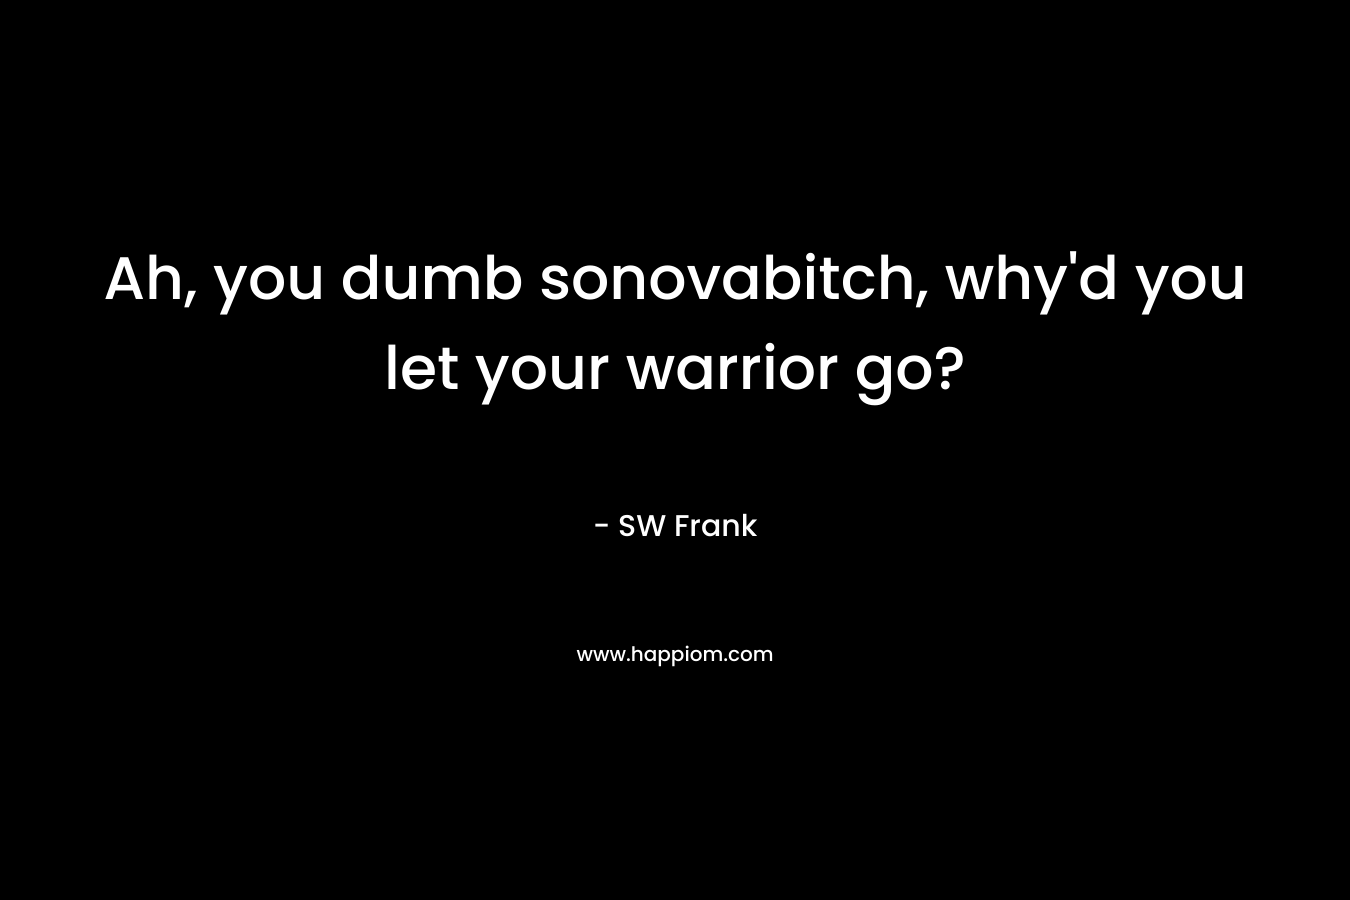 Ah, you dumb sonovabitch, why’d you let your warrior go? – SW Frank